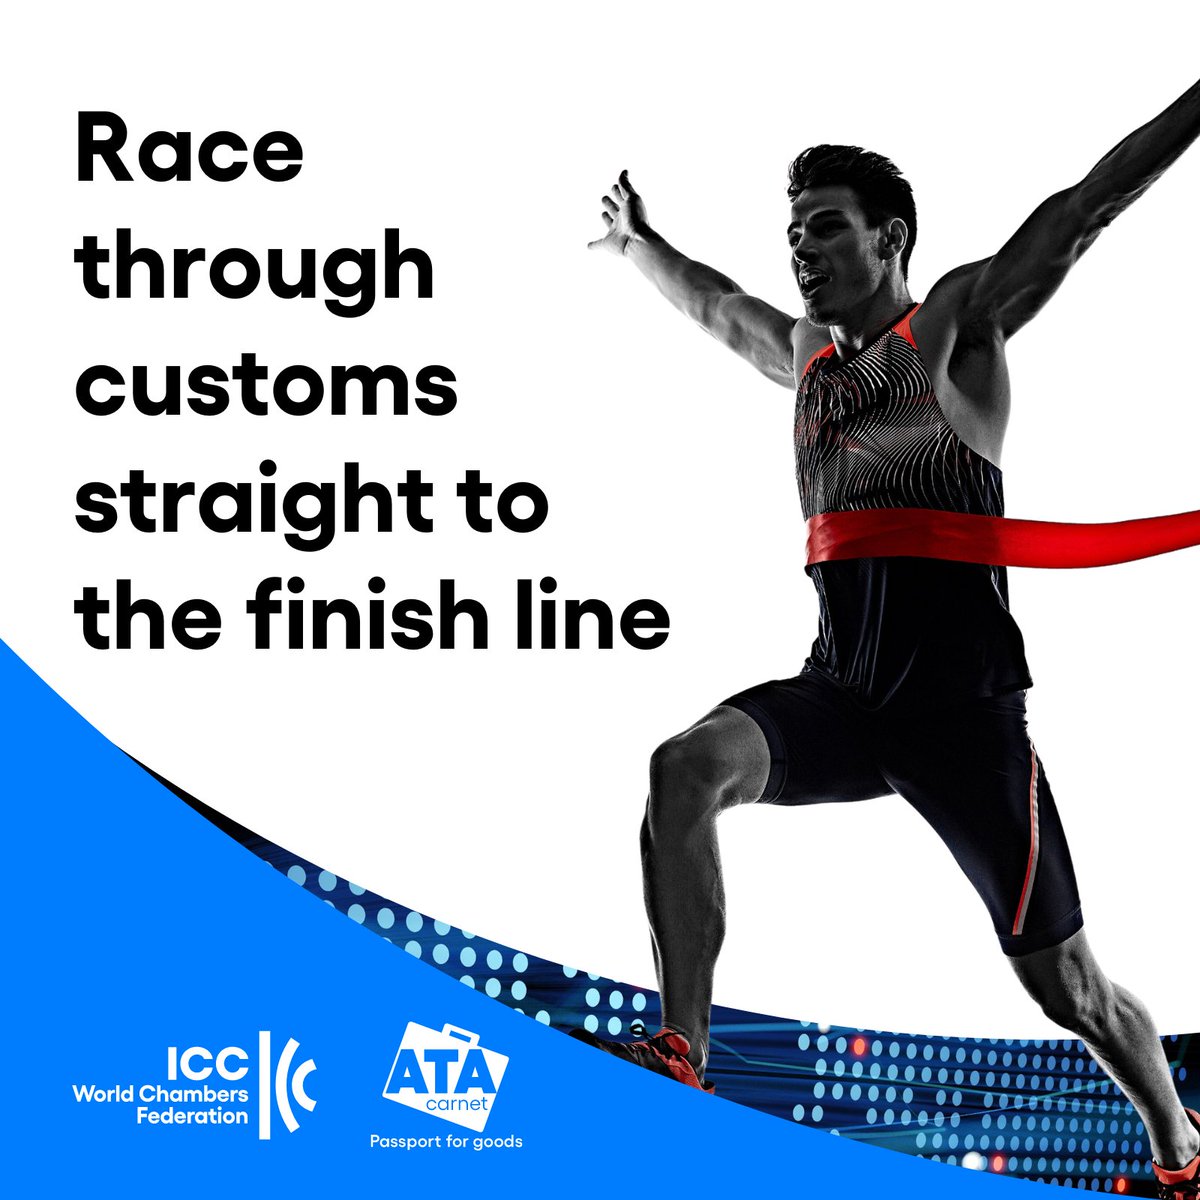 🏆 From #Beijing2022 to #Paris2024 to #MilanoCortina2026, we keep goods moving across borders for use at the Games.

Find your local #ATACarnet contact point in 80+ countries and territories: bit.ly/3W04Gtu

#TeamICC